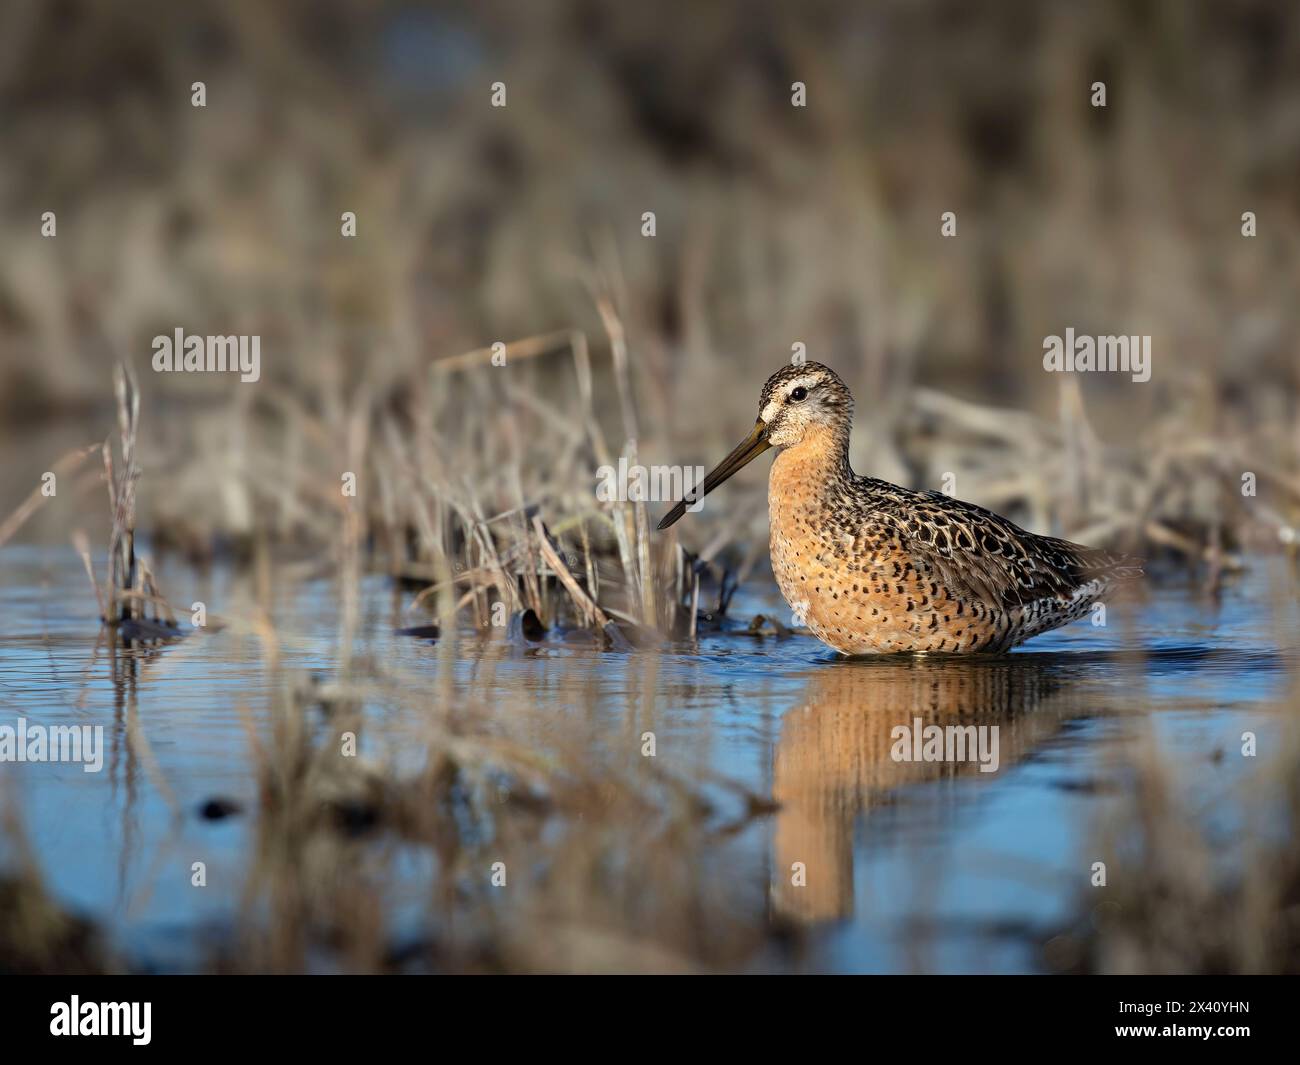 Short-billed dowitcher (Limnodromus griseus) pauses in an estuary in Southcentral Alaska's Susitna Flats in May. Dowitchers and many other shorebir... Stock Photo